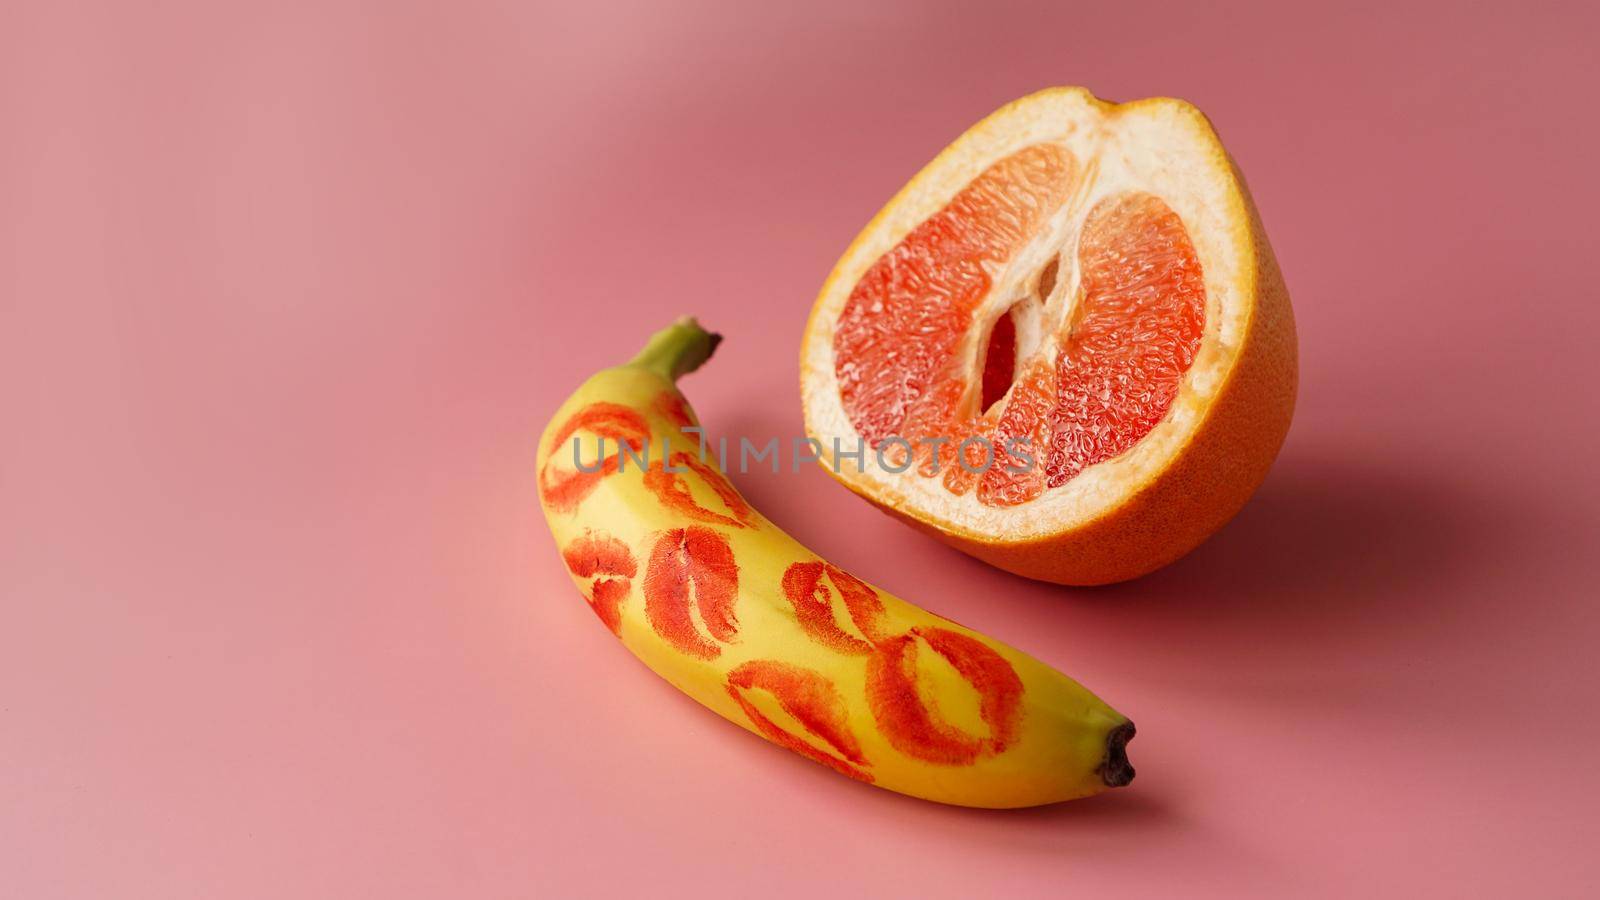 Composition with fresh banana with traces of red lipstick and grapefruit on pink background. Sex concept